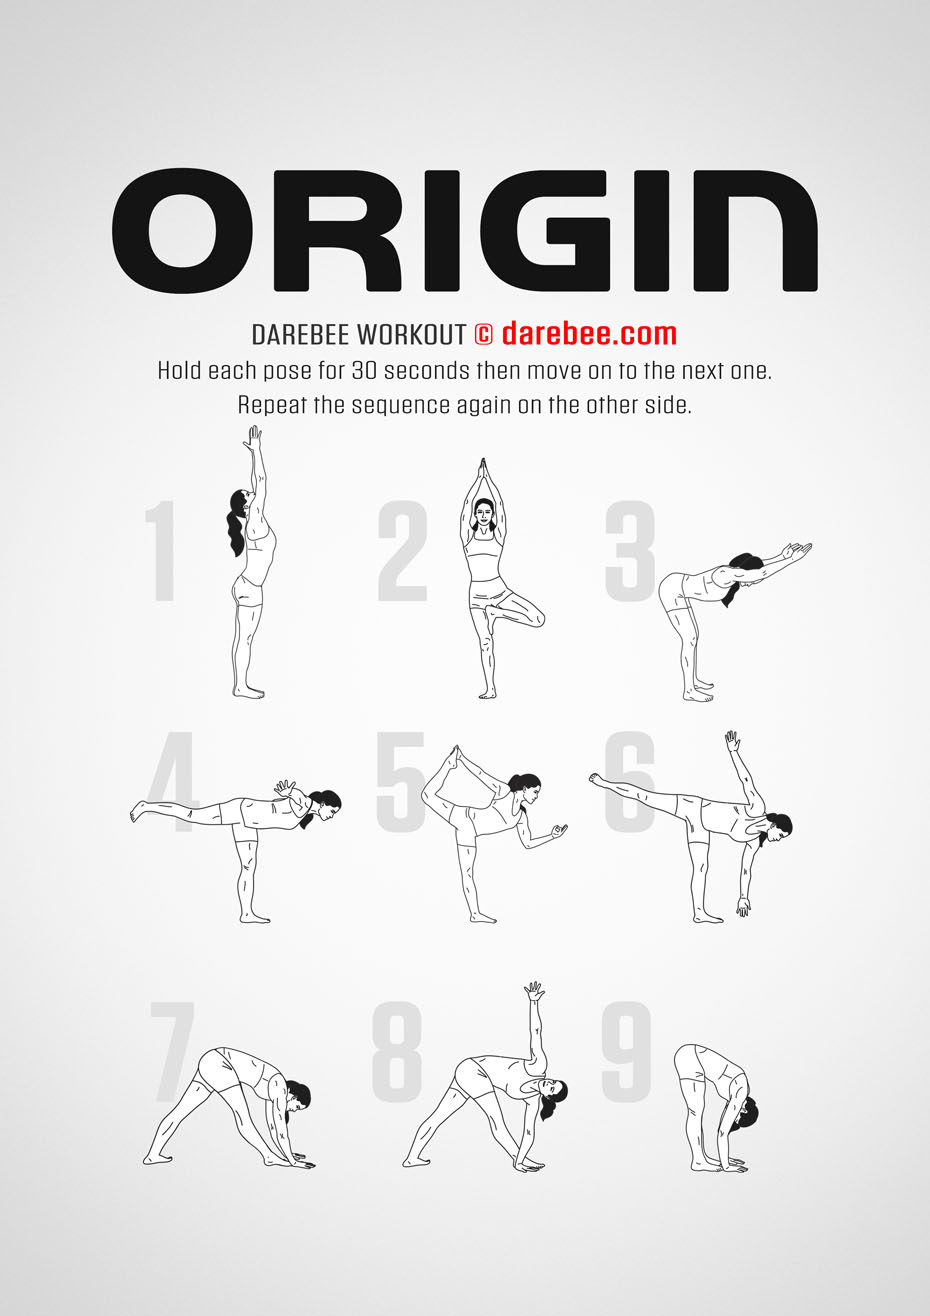 Origin is a DAREBEE no-equipment, yoga-based, total body home fitness workout that helps your mind and body rejuvenate and recover.